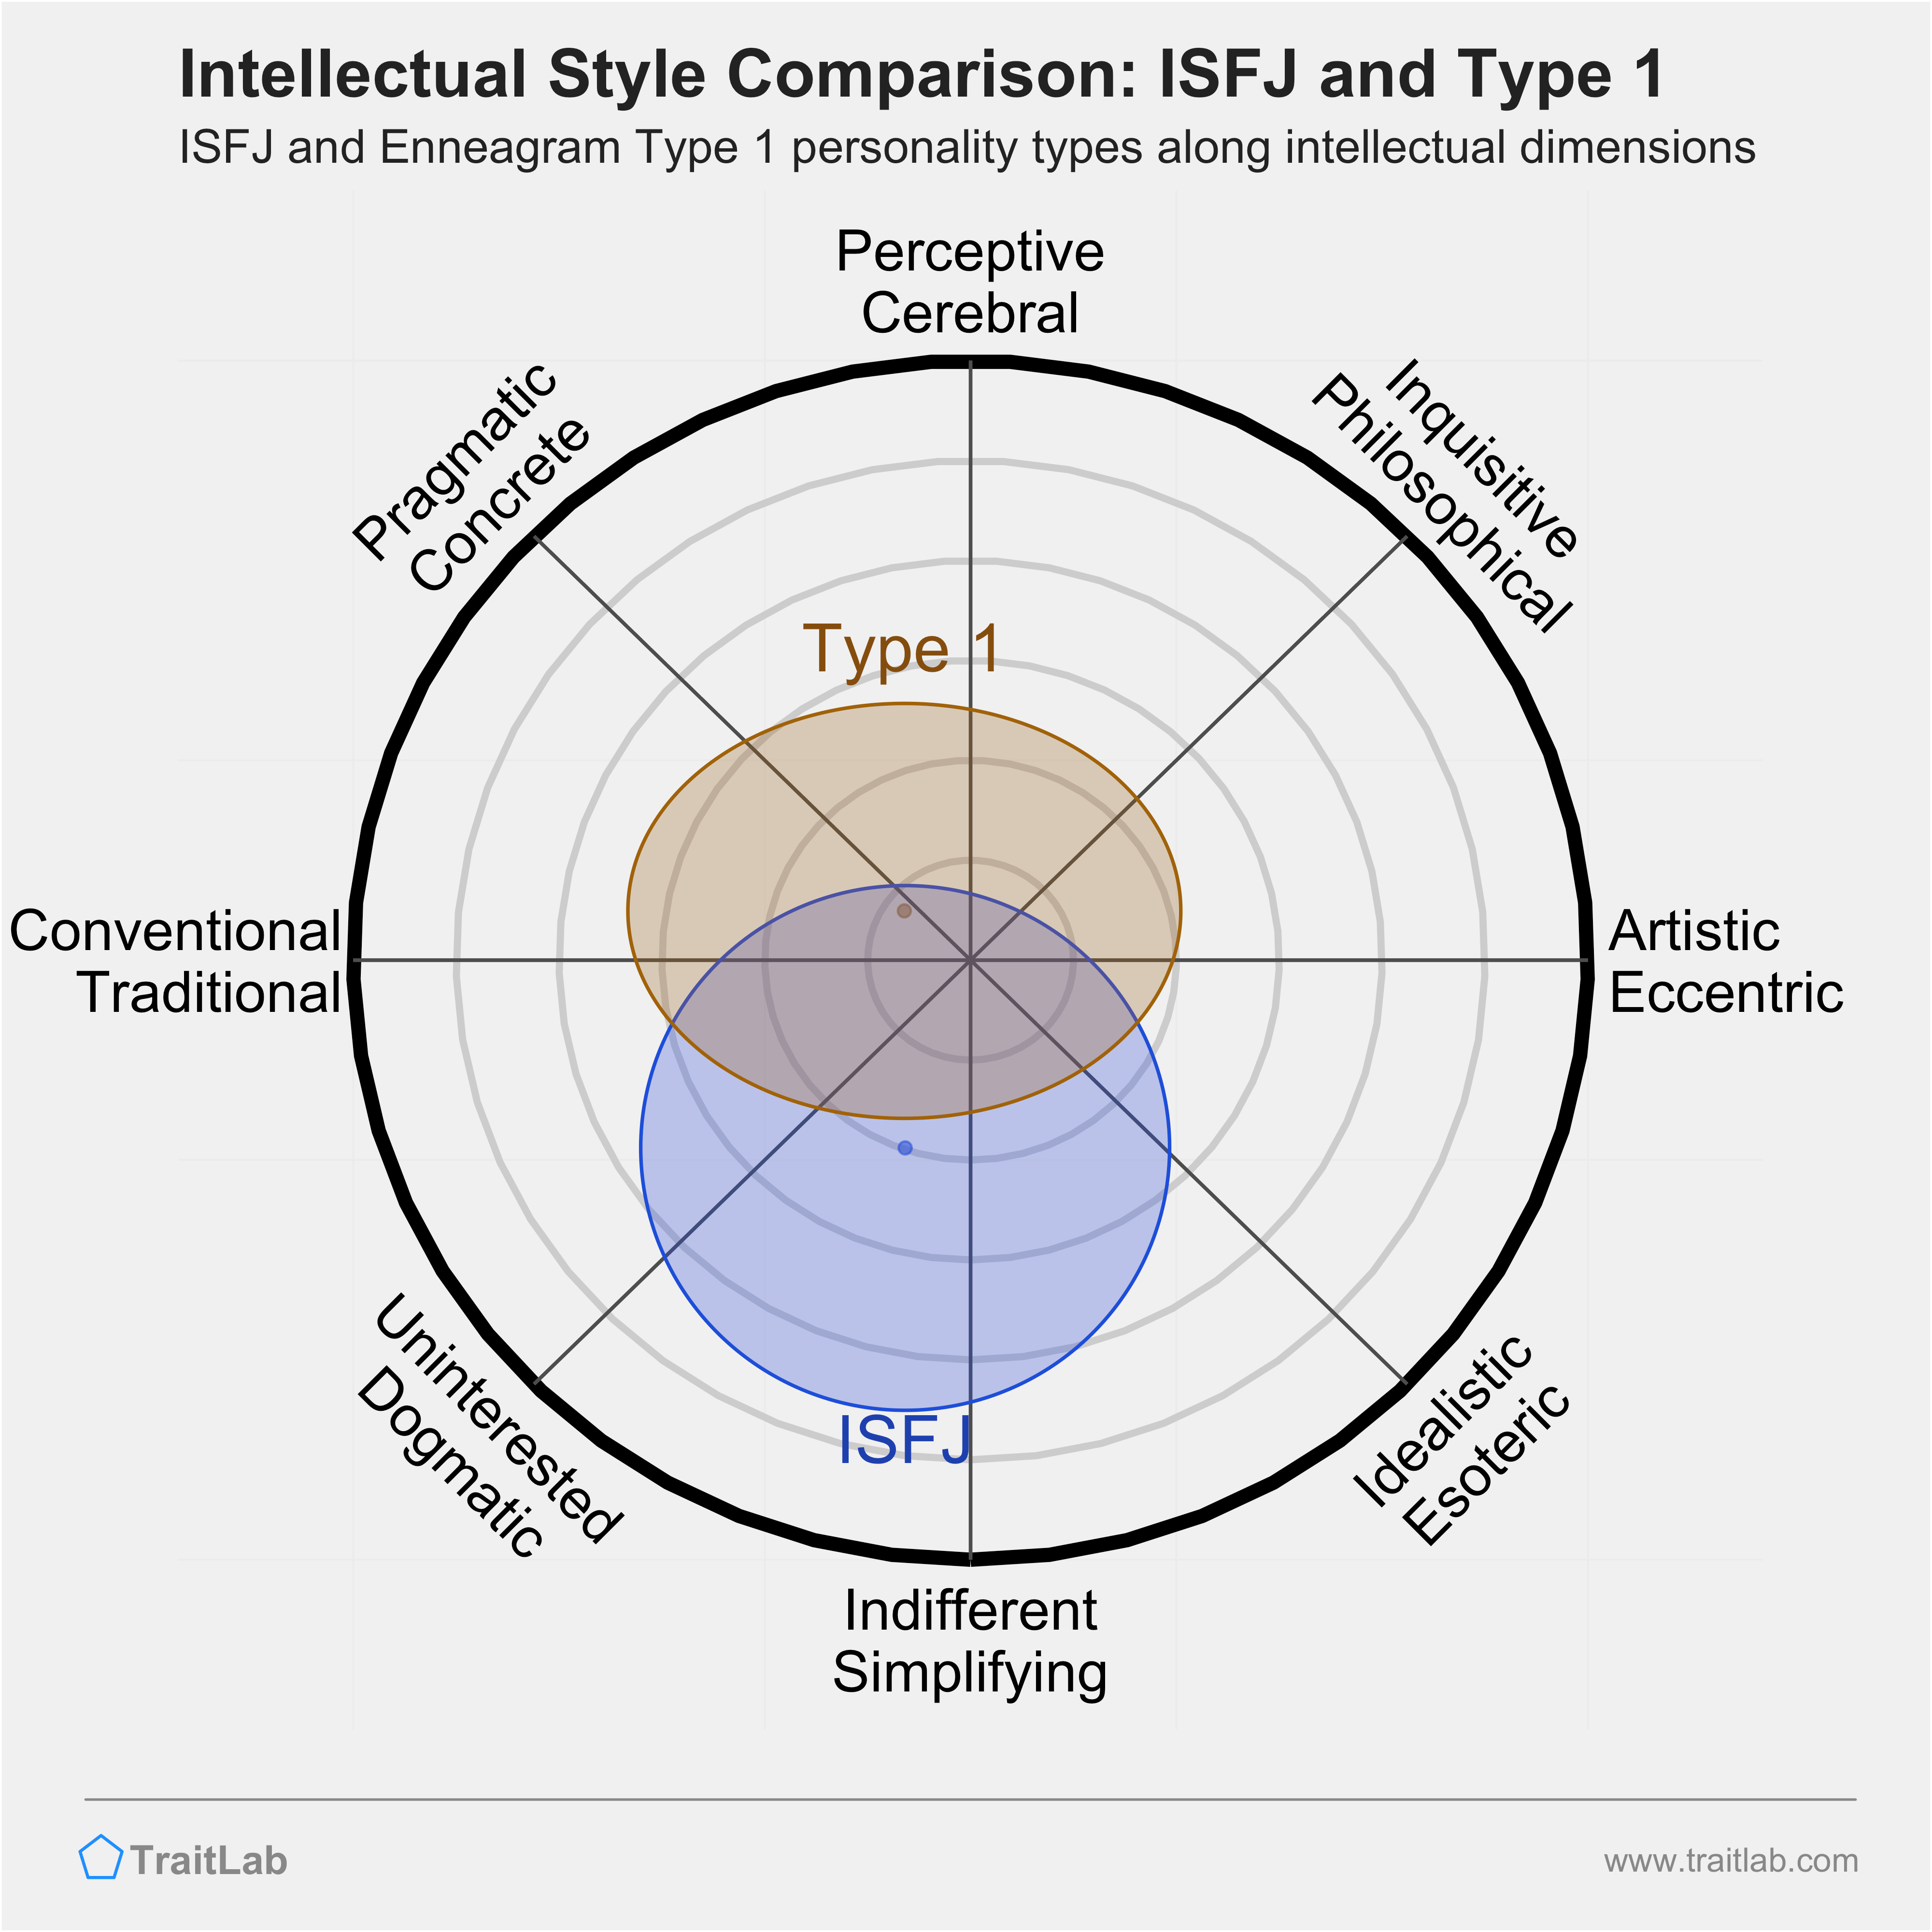 ISFJ and Type 1 comparison across intellectual dimensions